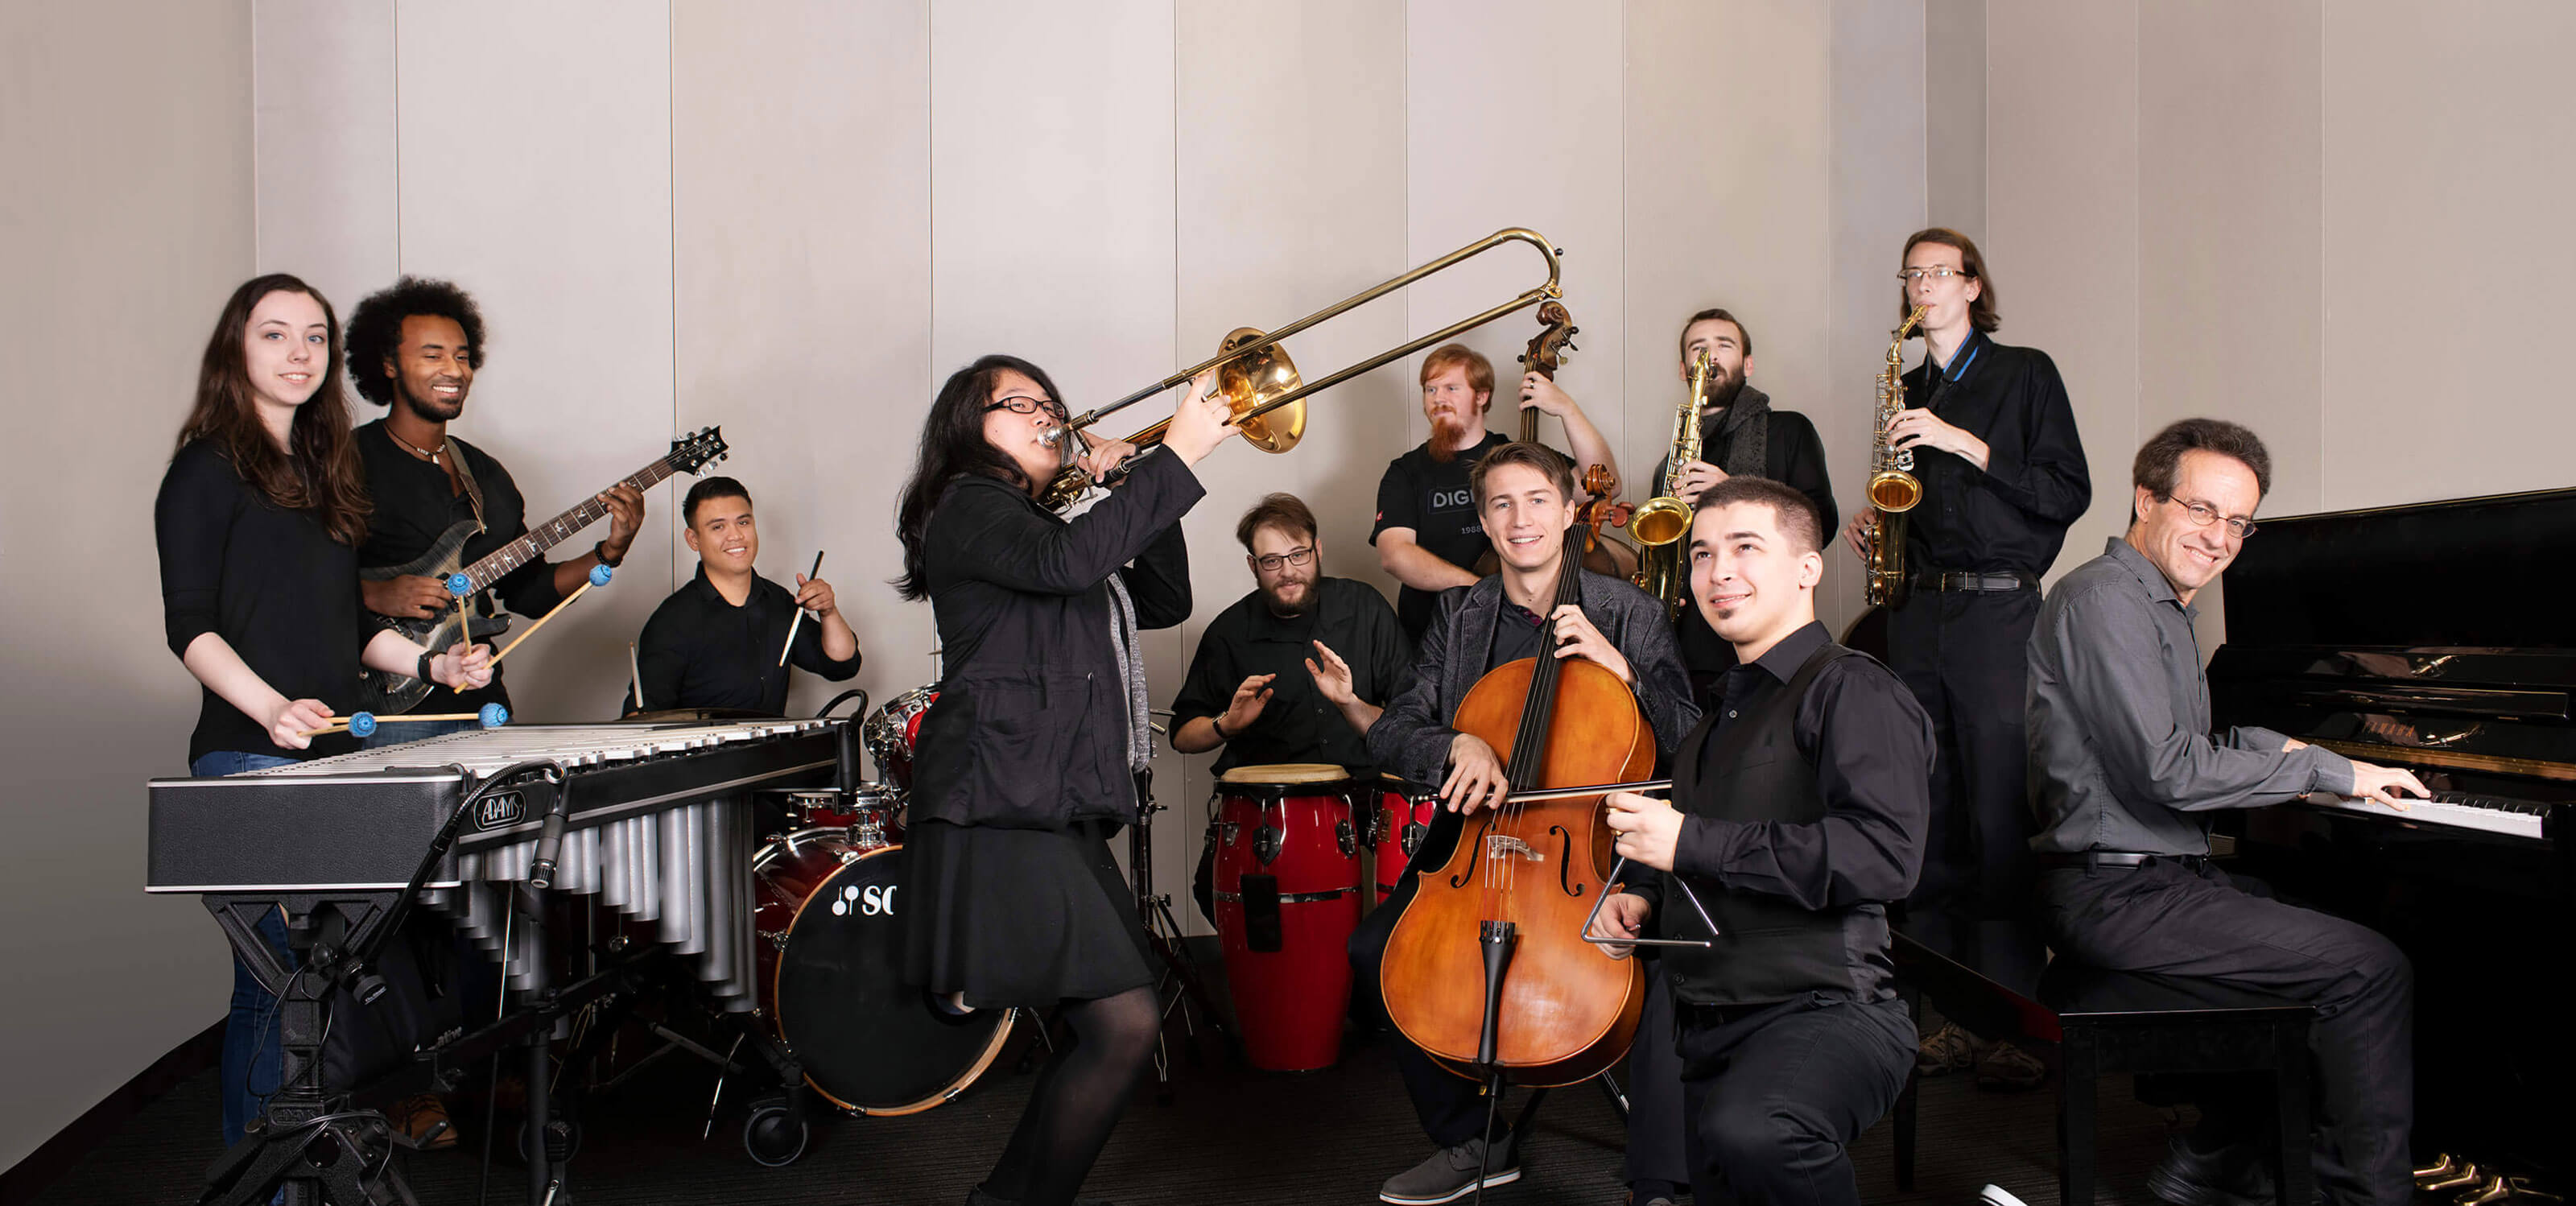 The DigiPen Jazz Ensemble posing with their instruments in a sound lab on campus